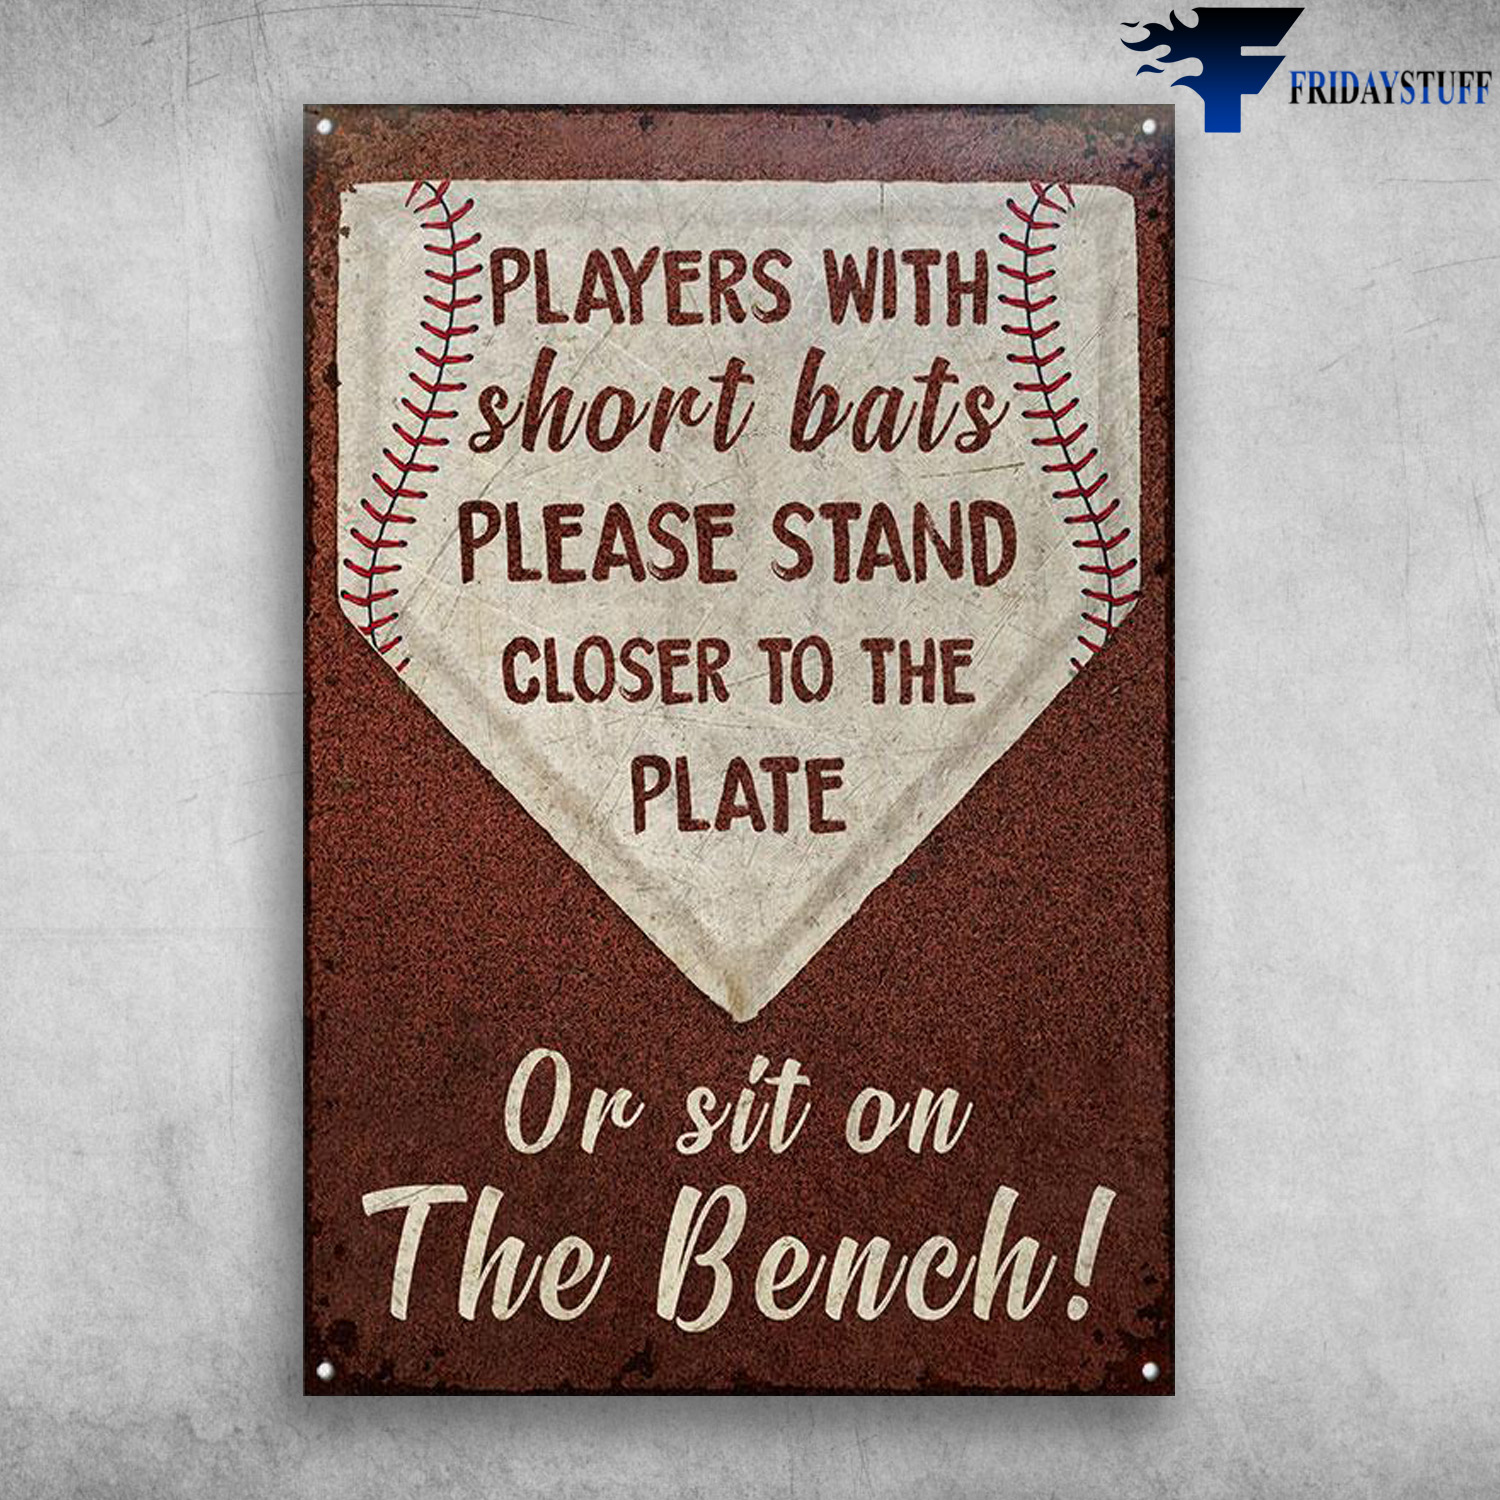 Baseball Bench - Players With Short Bats, Please Stand Closer To The Plate, Or Sit On The Bench